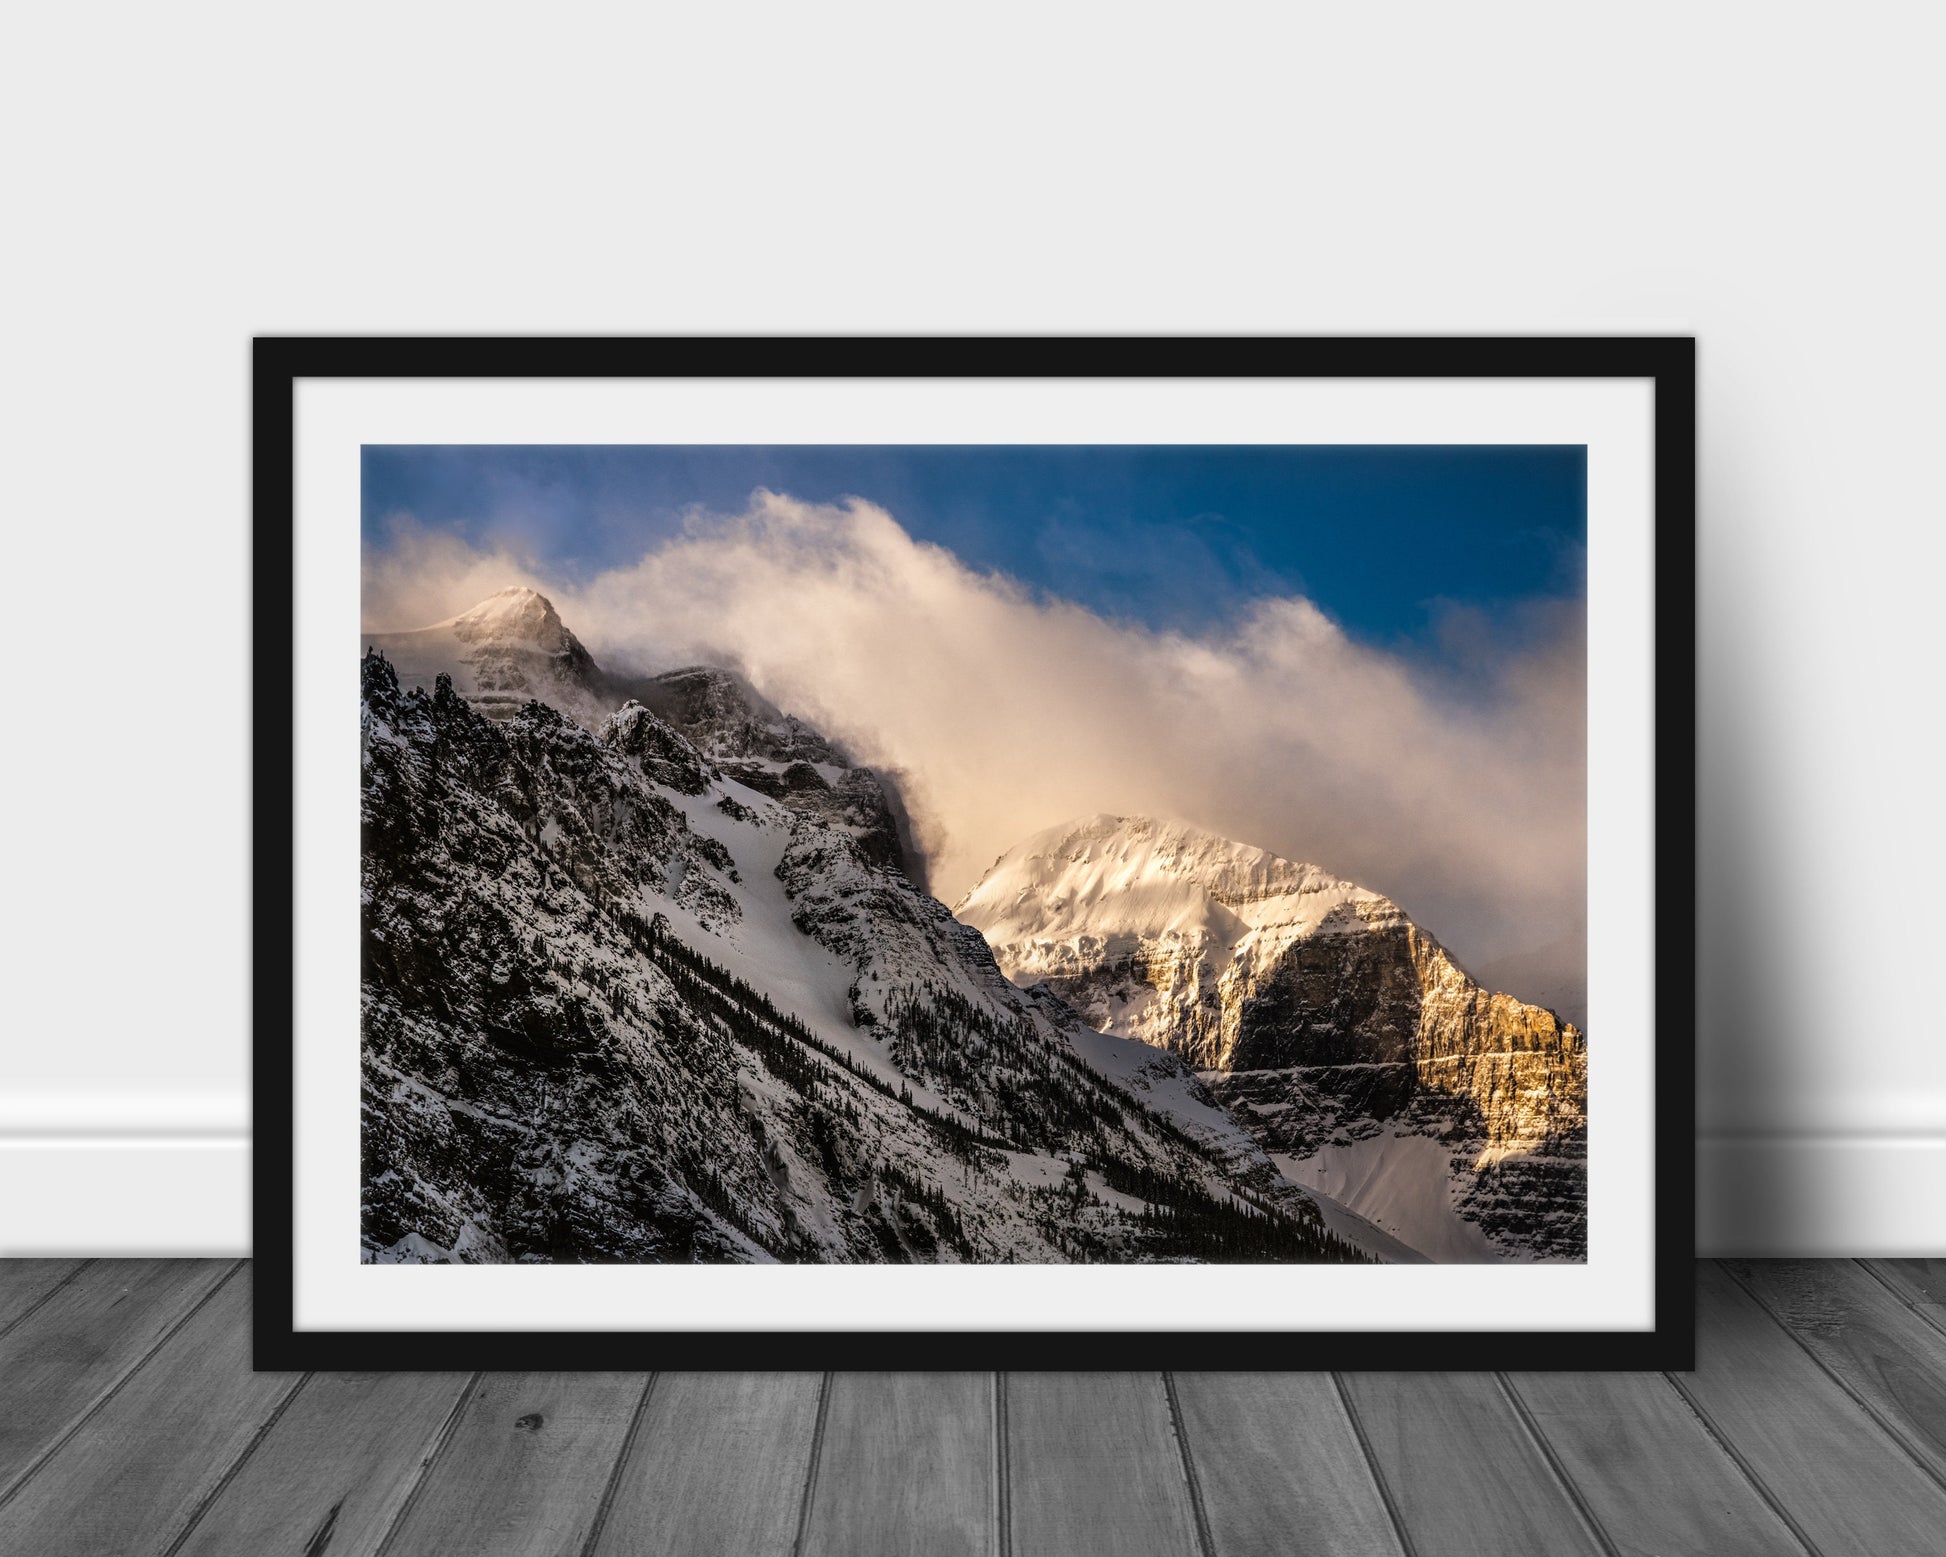 Moody Mountain in Banff, Canada - Landscape Photography, Moraine Lake, Banff National Park, Color Print